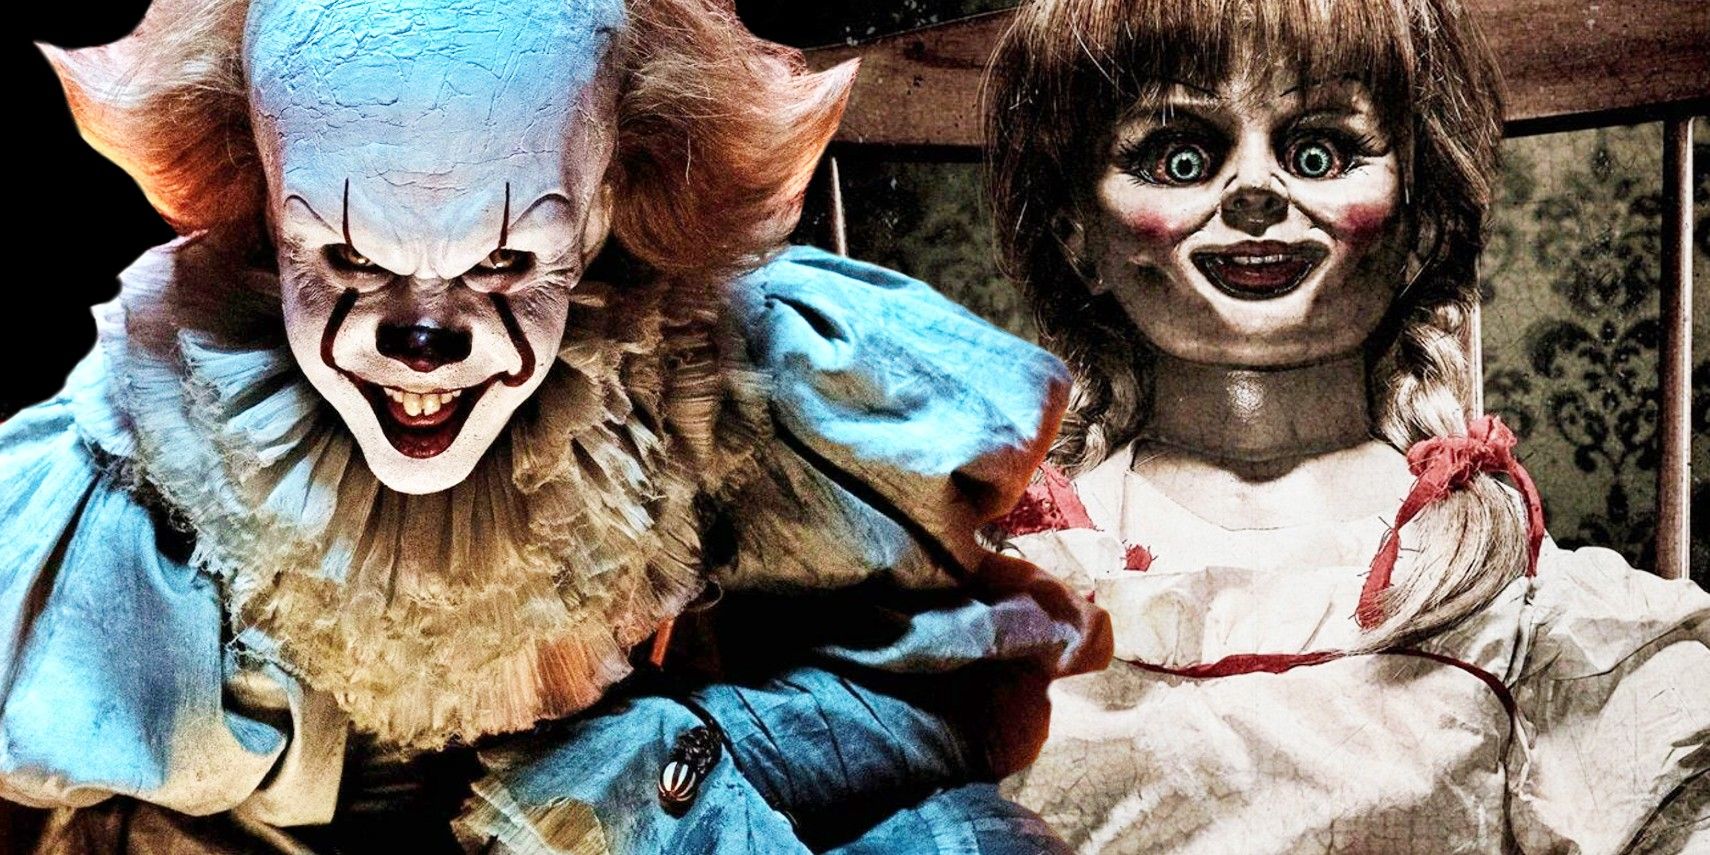 A layered image of Pennywise the dancing clown from IT and the Annabelle doll from the Annabelle horror movies